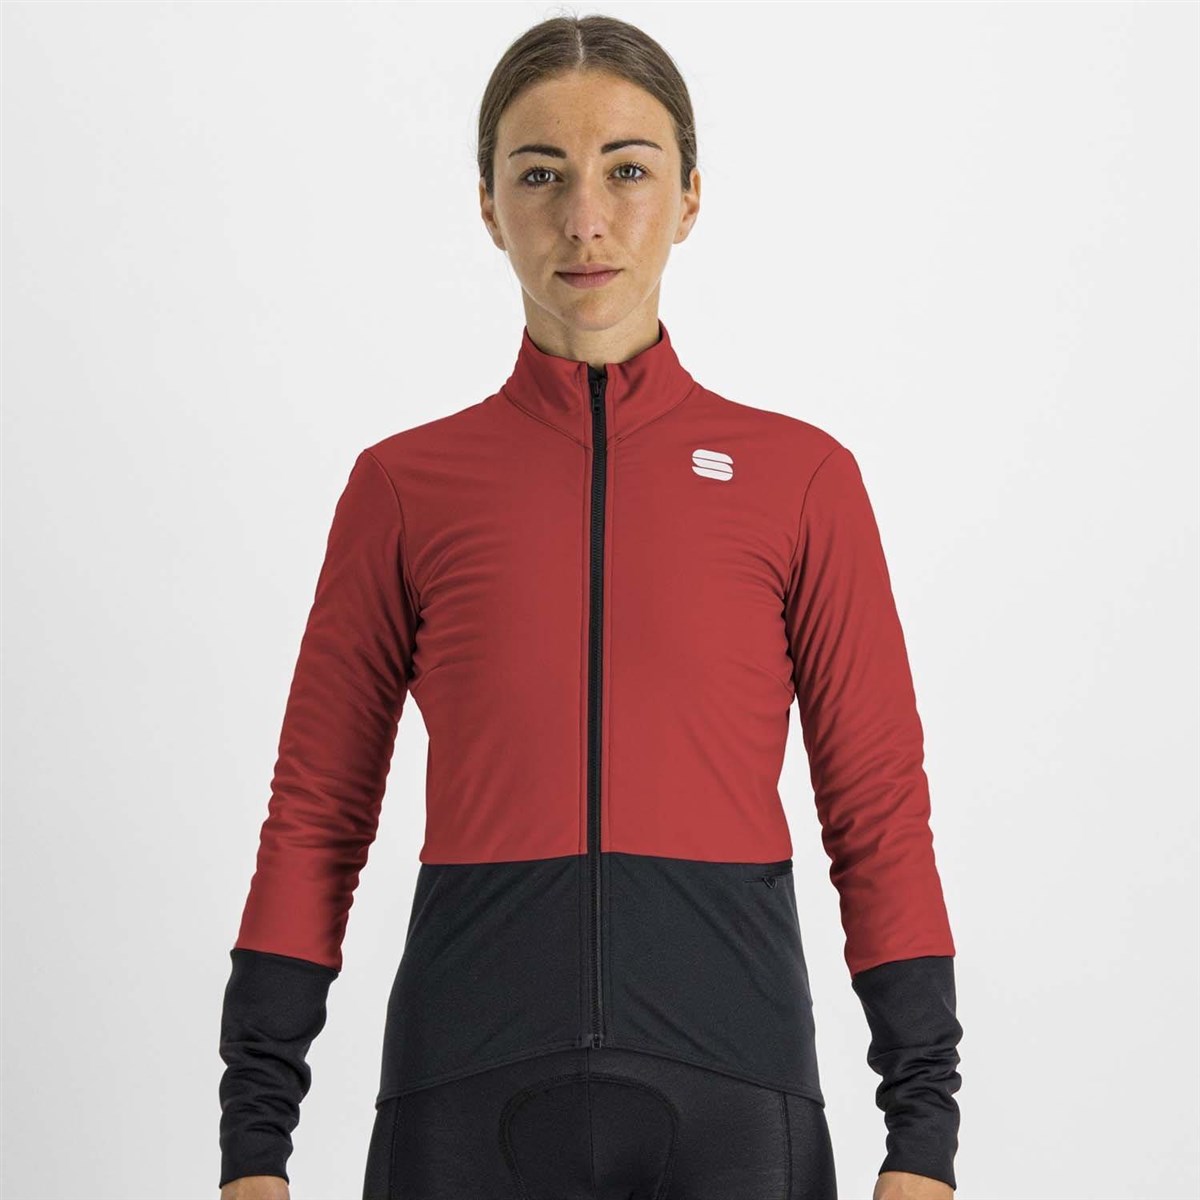 Sportful Total Comfort Womens Long Sleeve Jacket product image